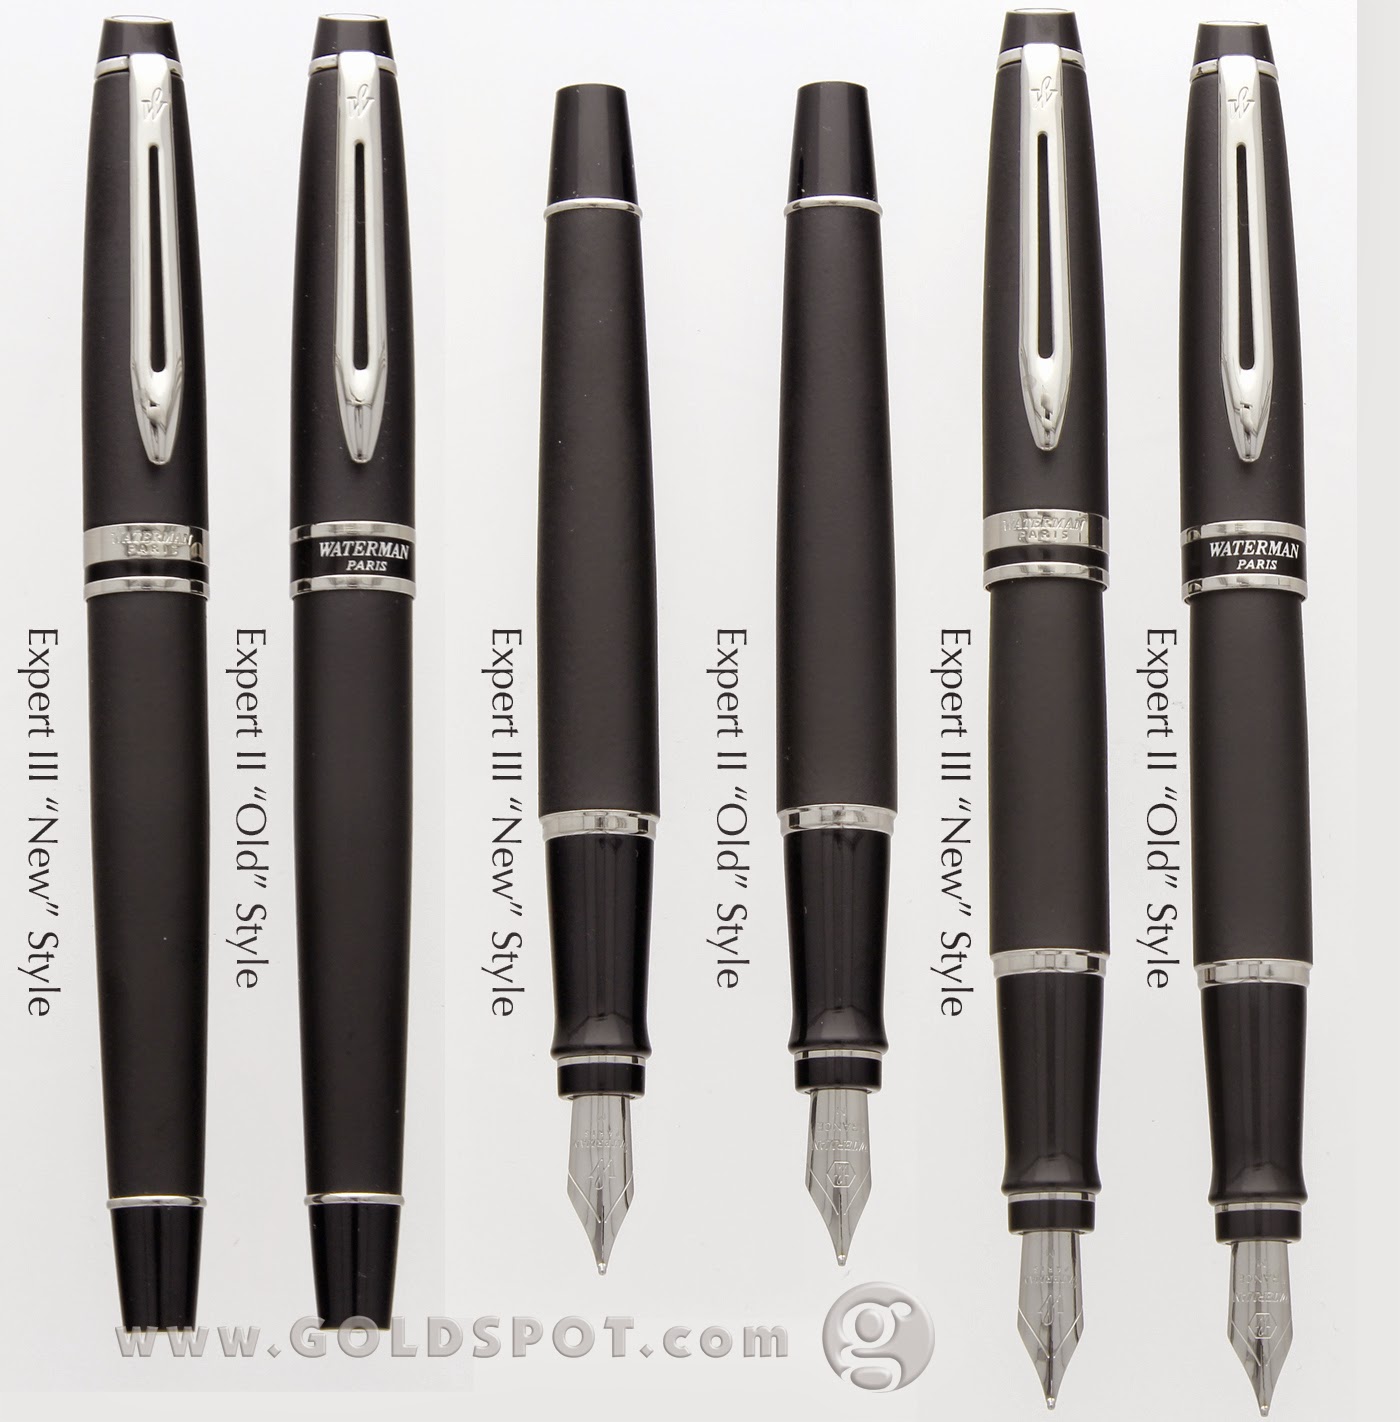 Whats the Difference Between a Waterman Expert II and Expert III